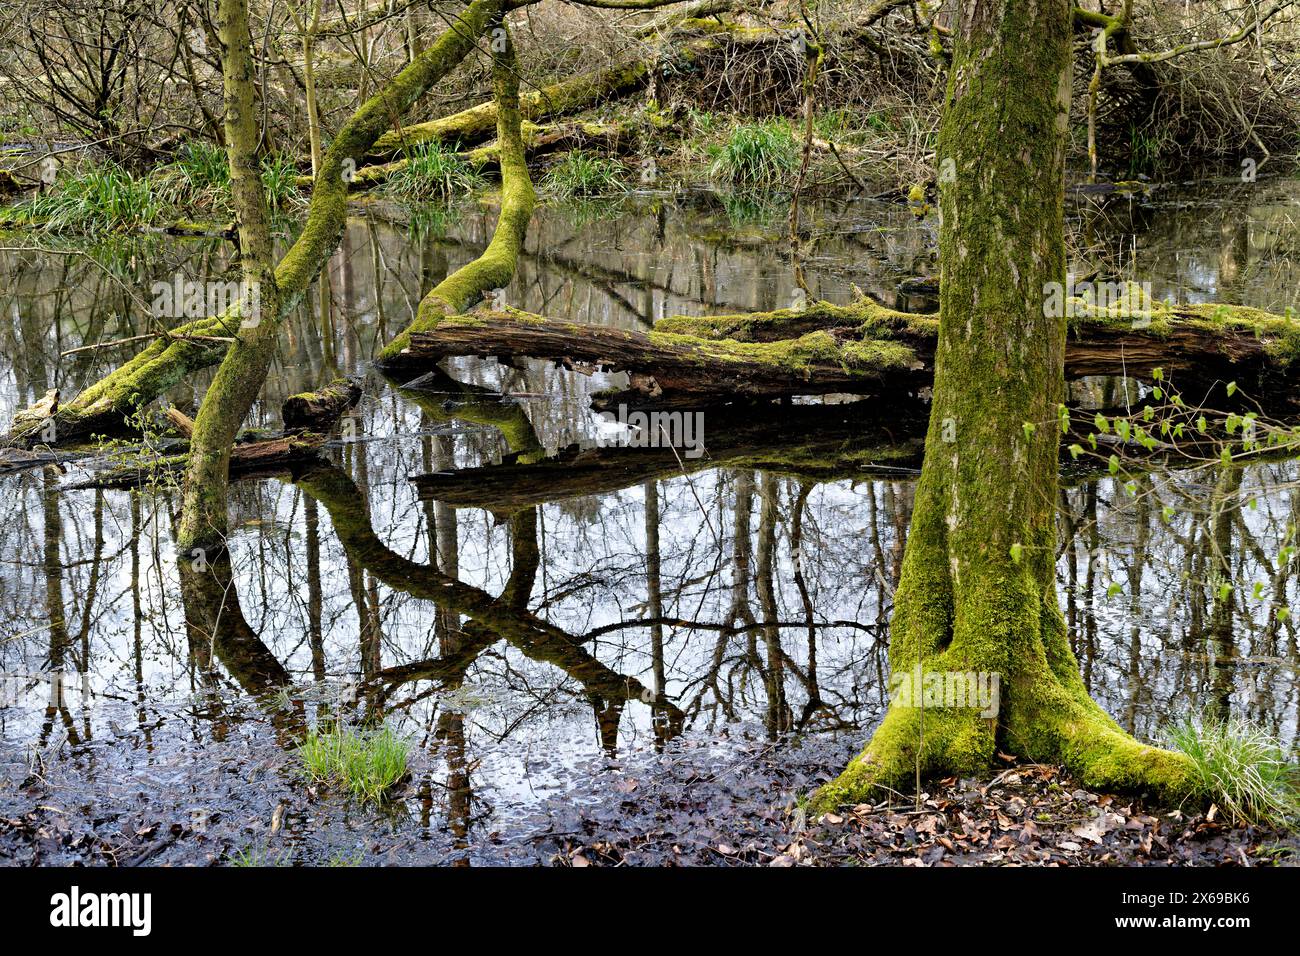 Europe, Germany, North Rhine-Westphalia, Bonn, city, Bonn, Ippendorf, Kottenforst, Waldau, forest, nature reserve, forest reserve, swampy terrain, water, beech, pine, tree, tree stump, moss-covered trunk lying in water, dead, deadwood, weathered, atmosphere, mystical, spring, beginning green, slightly cloudy, daylight, Stock Photo